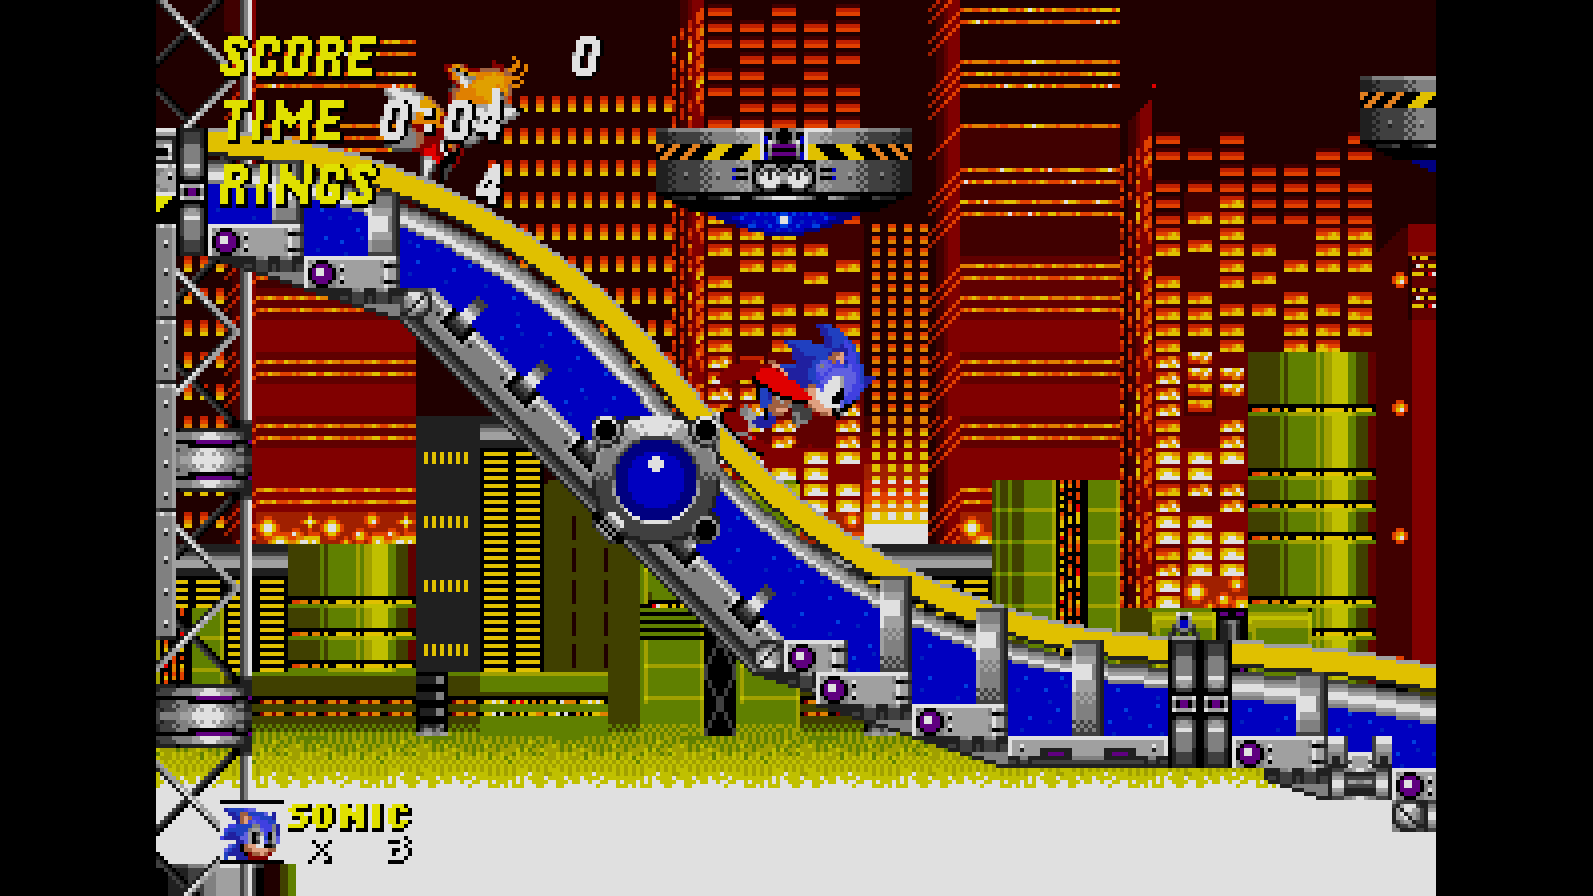 Chemical Plant Zone might be the greatest Sonic zone ever created. (Screenshot: Sega / MobyGames)